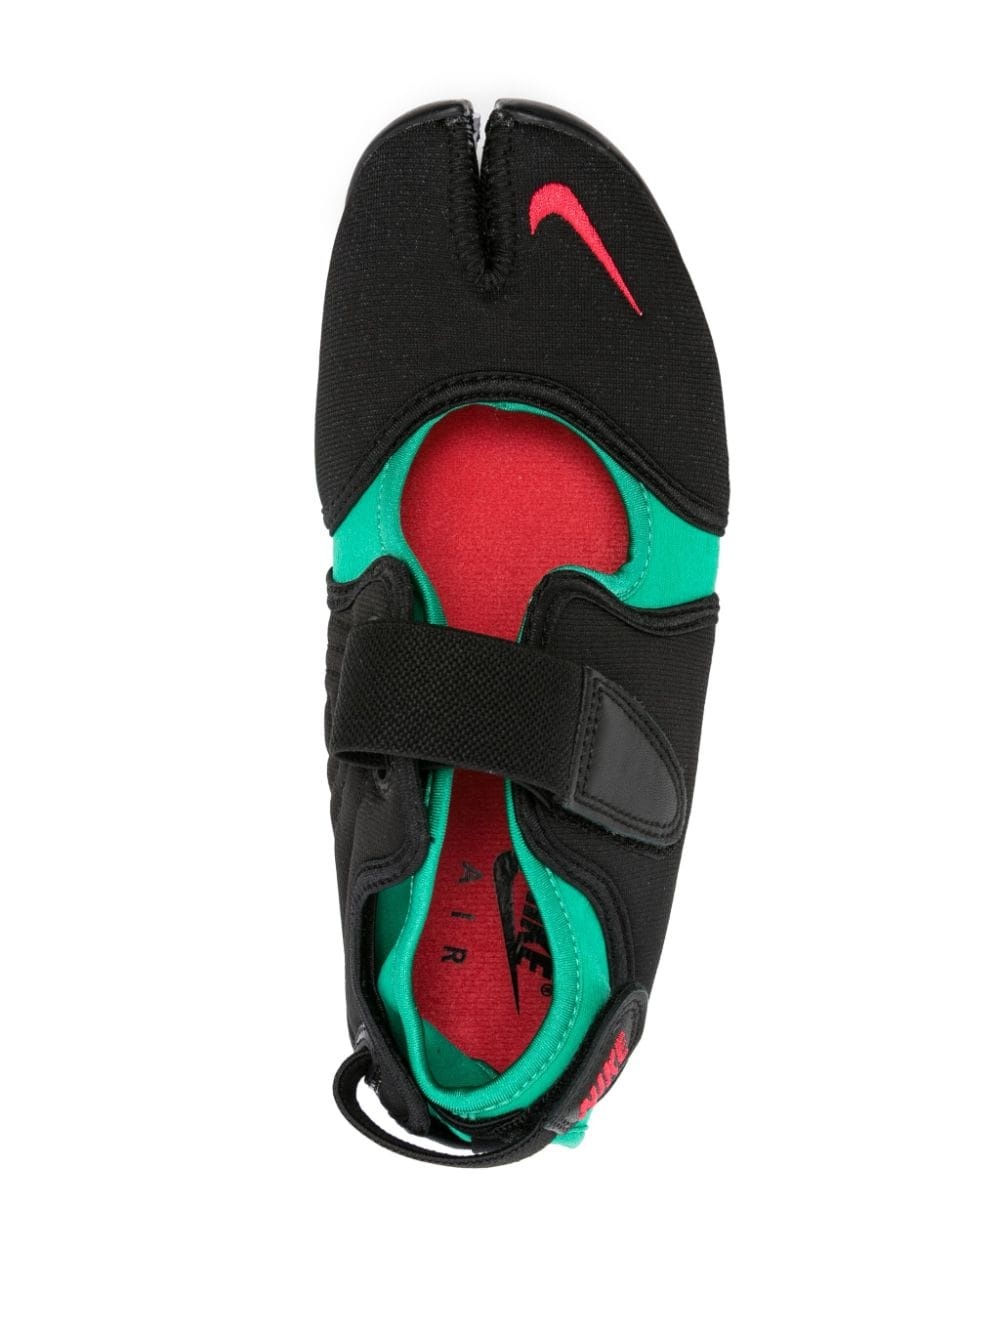 Air Rift "University Red and Stadium Green" sneakers - 6